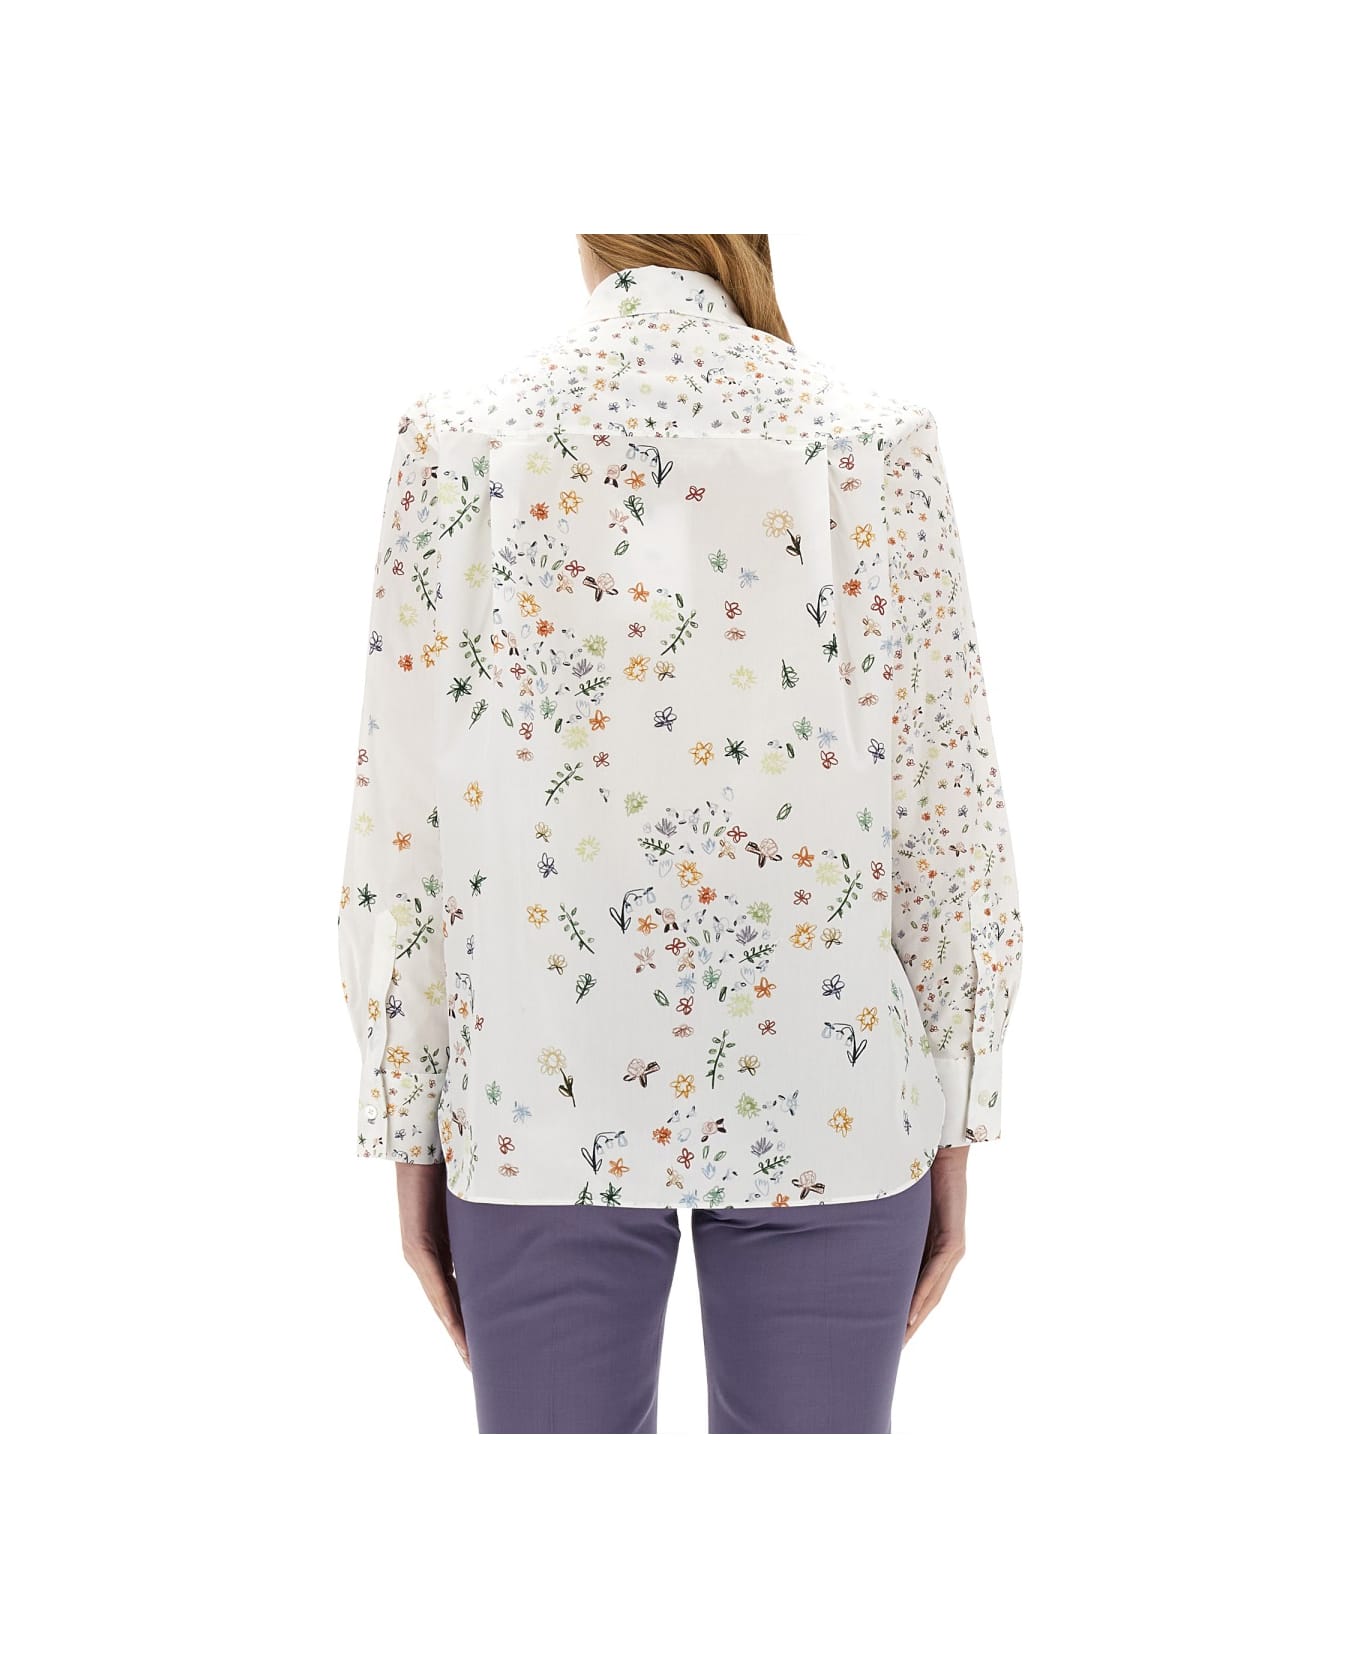 PS by Paul Smith Floral Print Shirt - WHITE シャツ